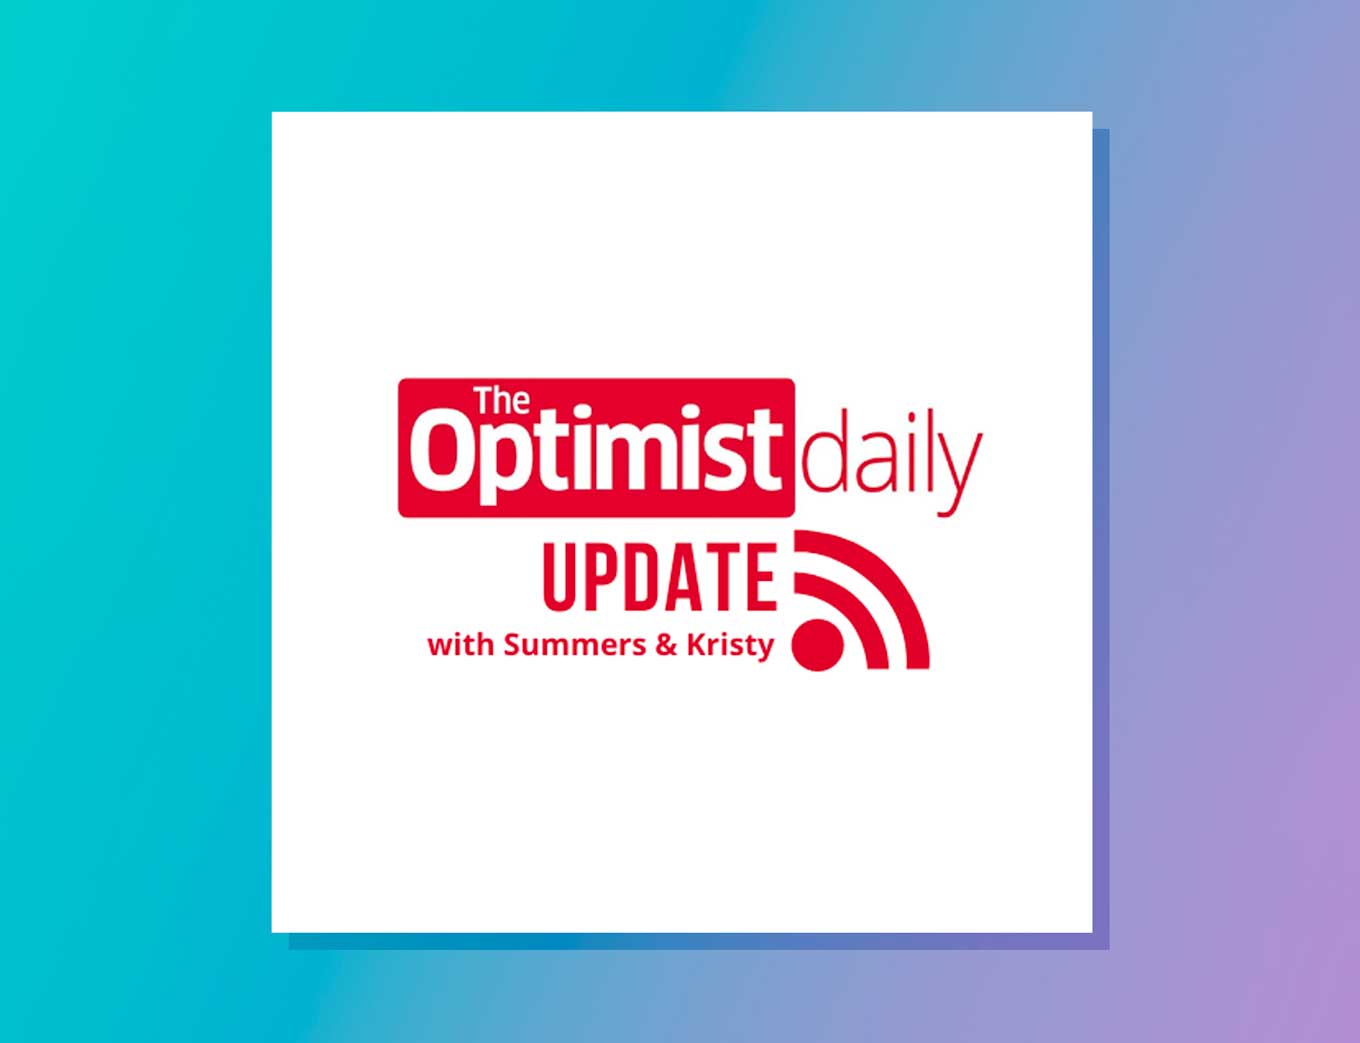 Podcast Artwork: The Optimist Daily Update with Summers & Kristy